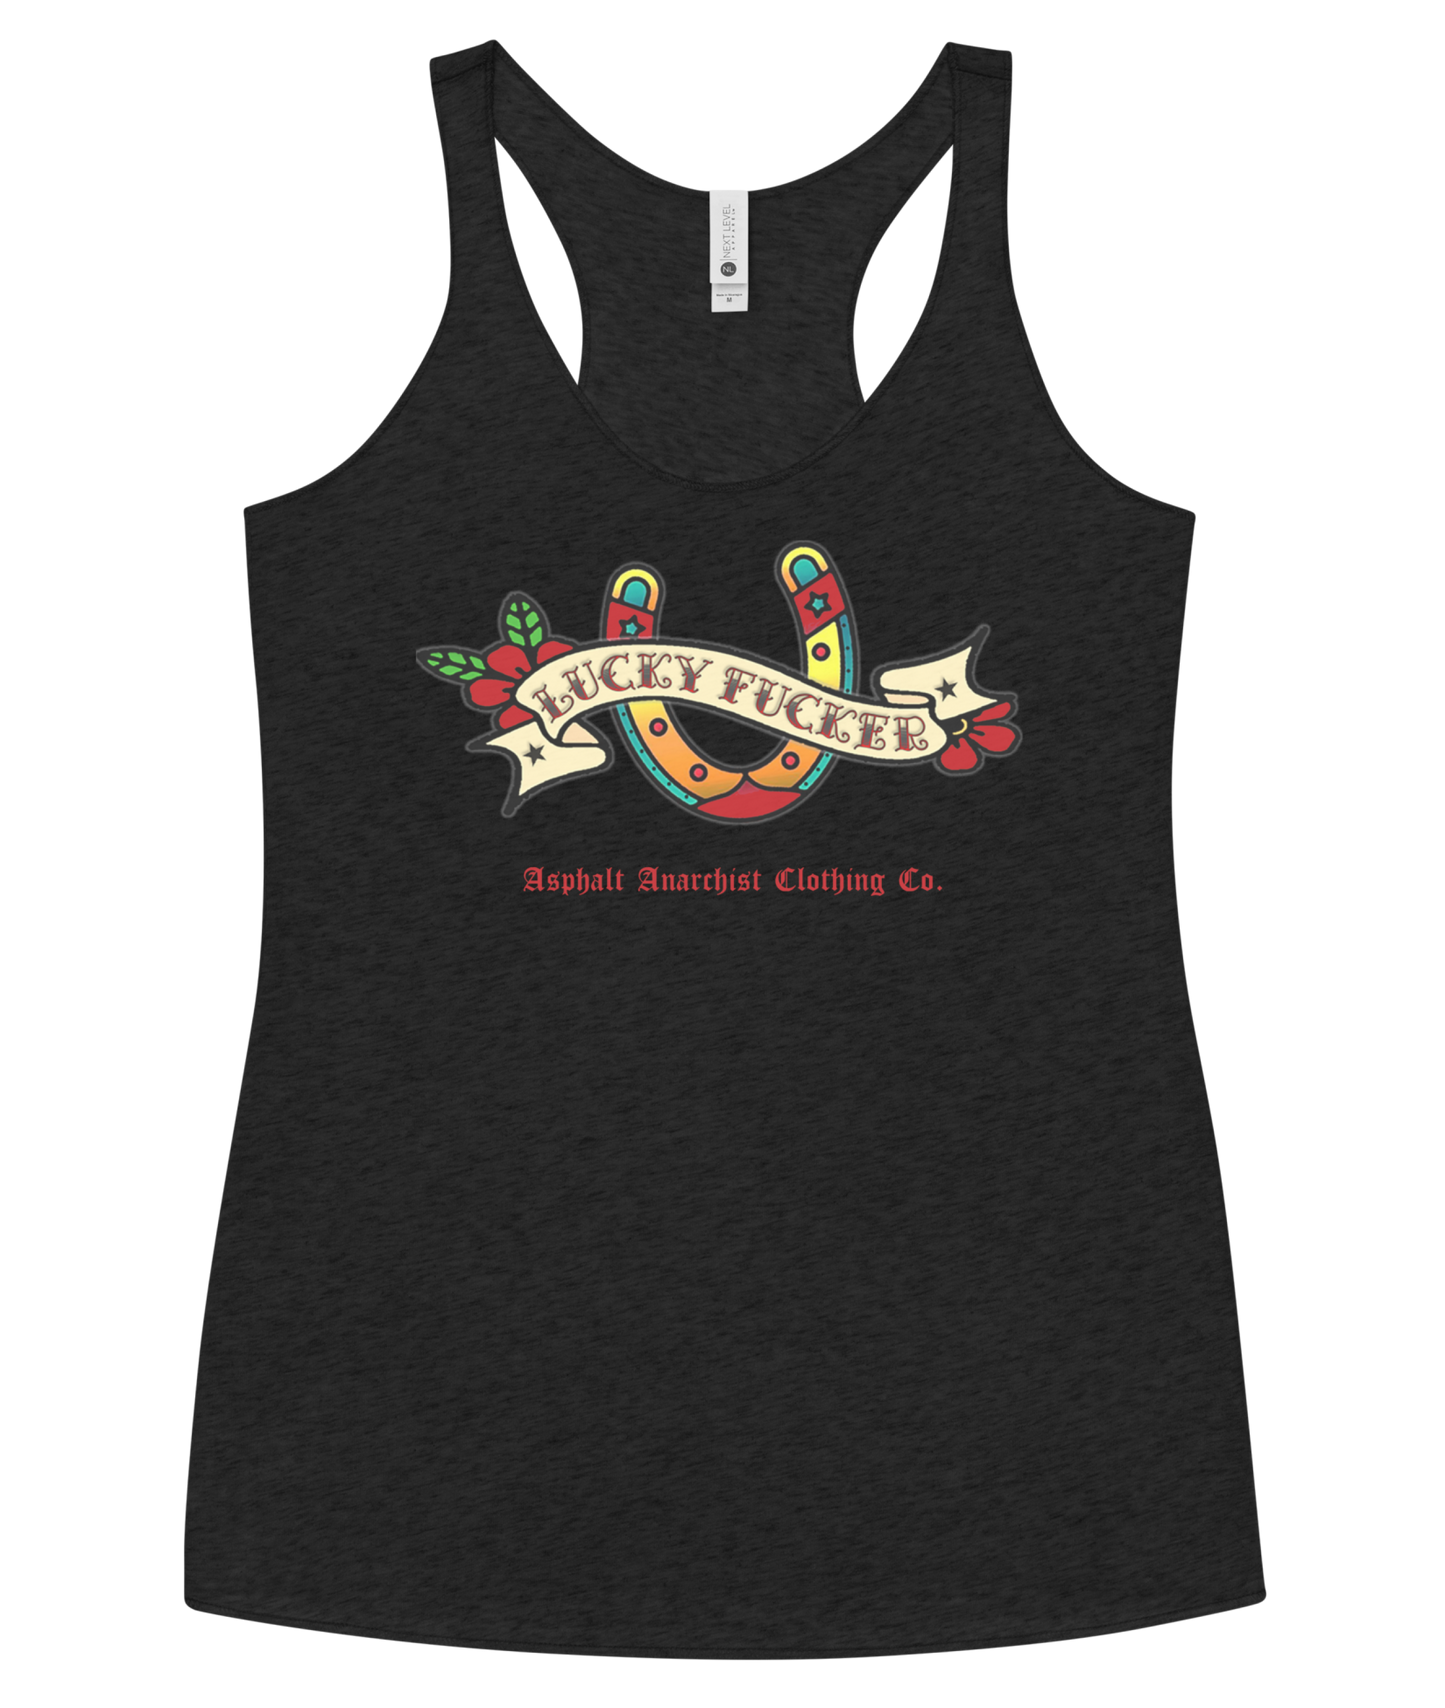 The Lucky Fucker Women's Racerback Tank From Asphalt Anarchist Clothing Co. HOT ROD KUSTOM KULTURE APPAREL & PRODUCTS